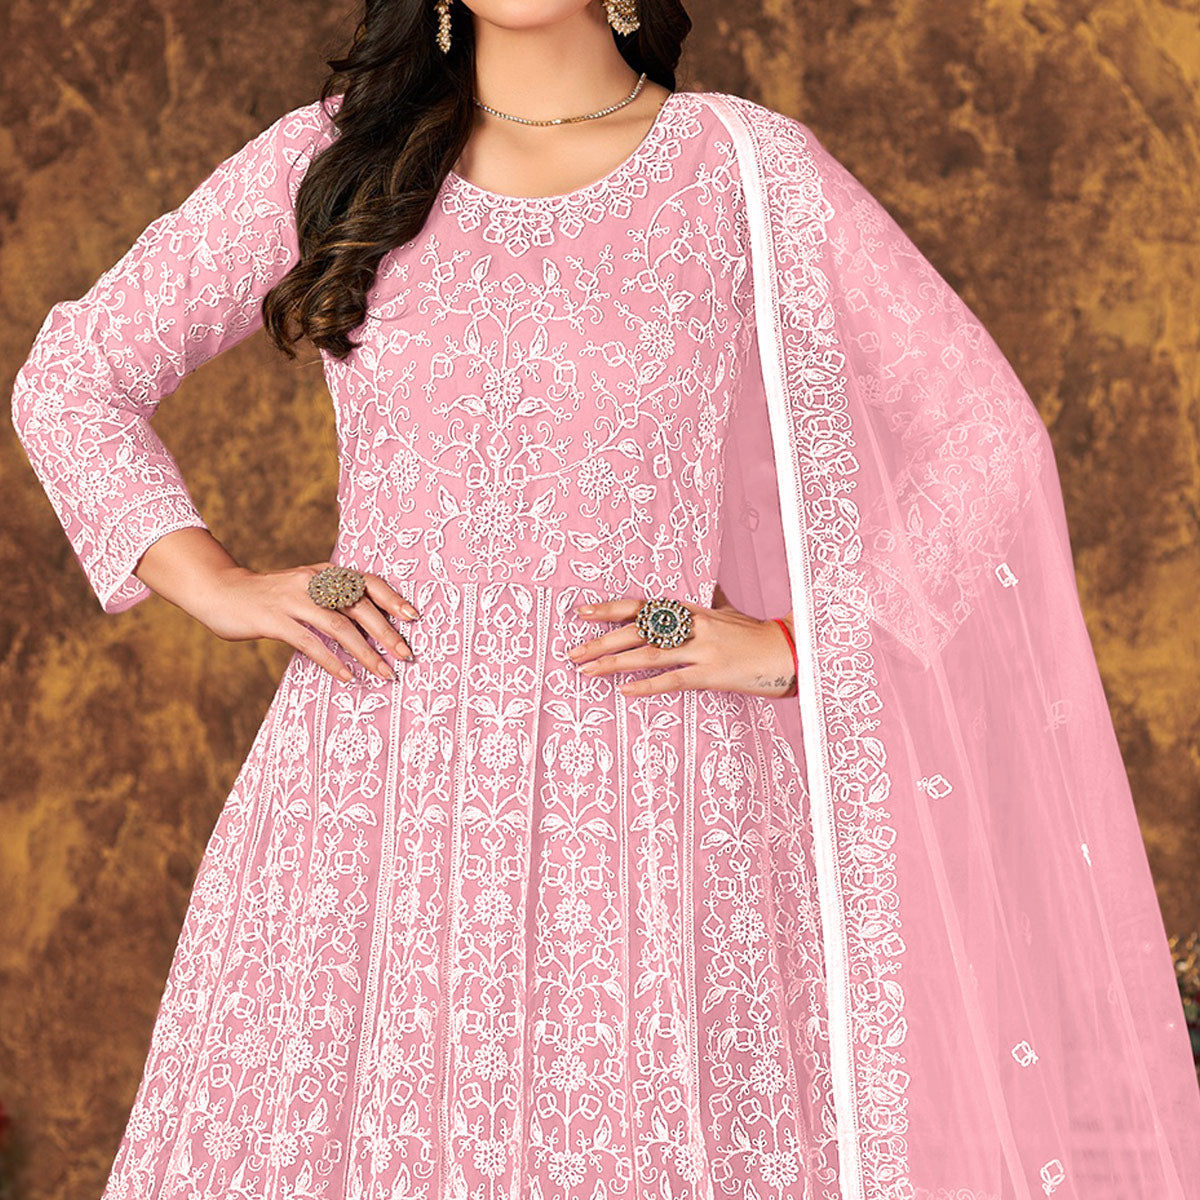 Pink Floral Embroidered Net Semi Stitched Anarkali Suit